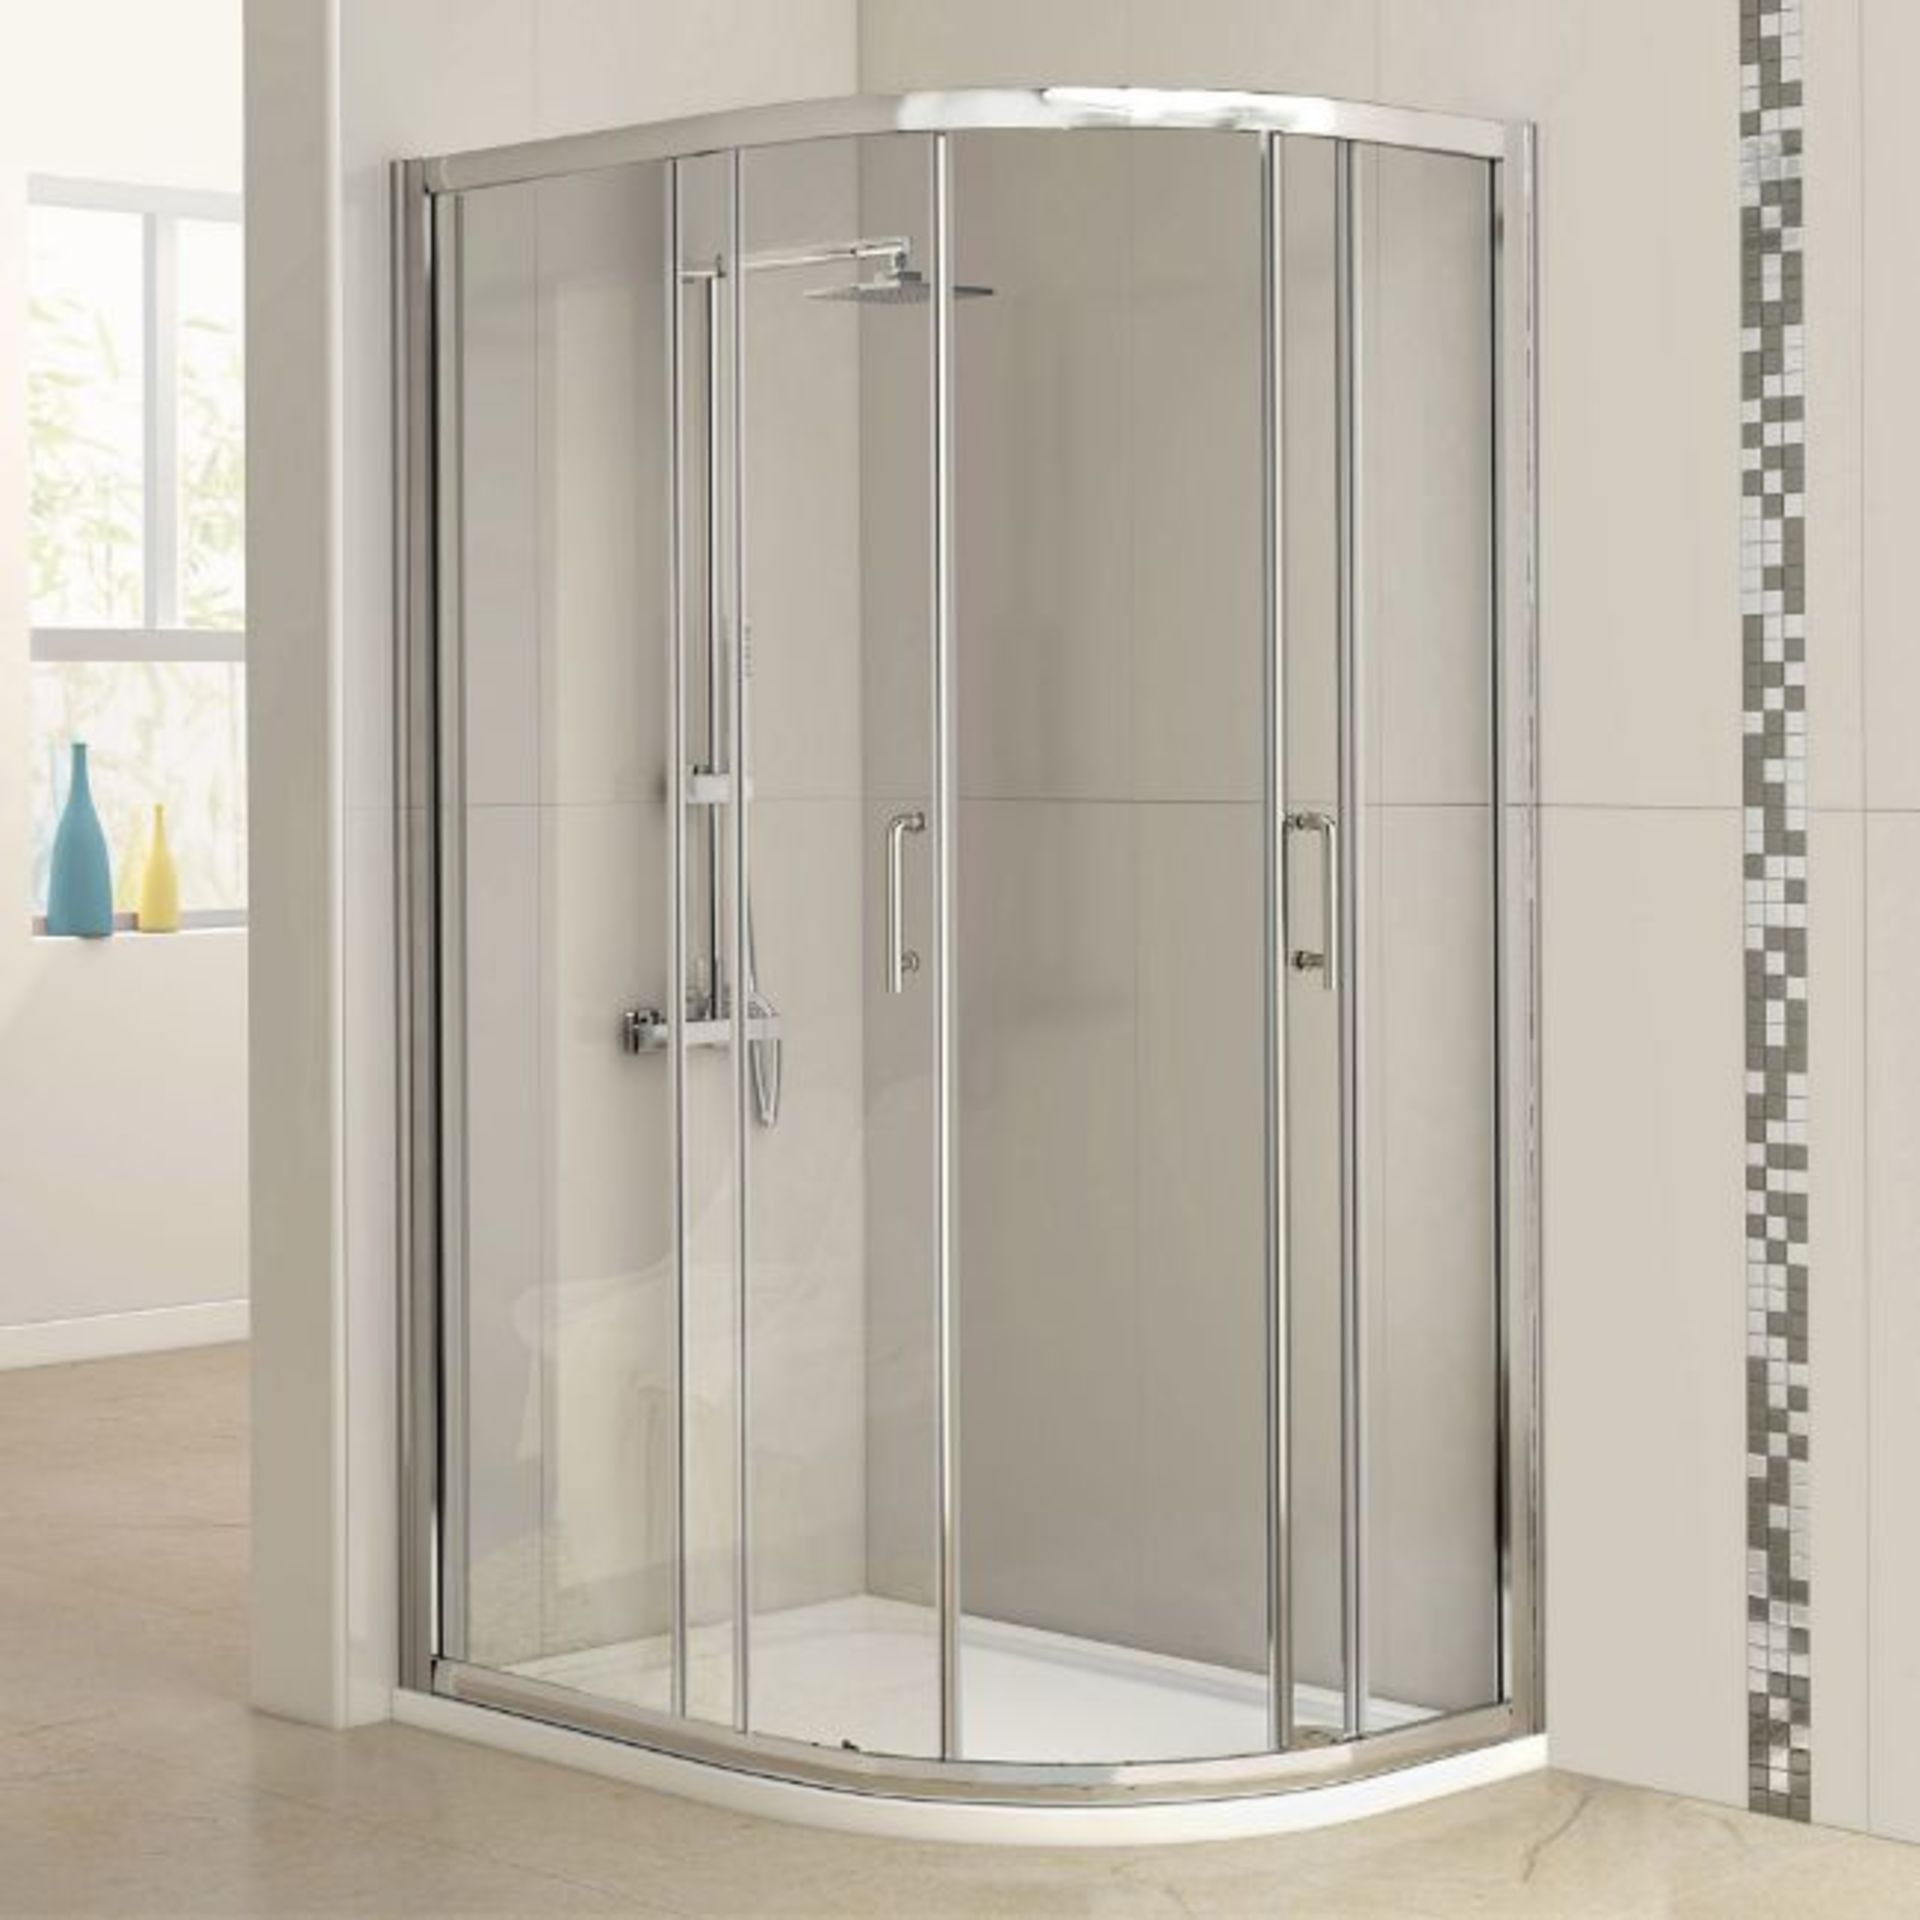 NEW Twyfords 1200x900mm - 6mm - Offset Quadrant Shower Enclosure. RRP £599.99.Make the most o...